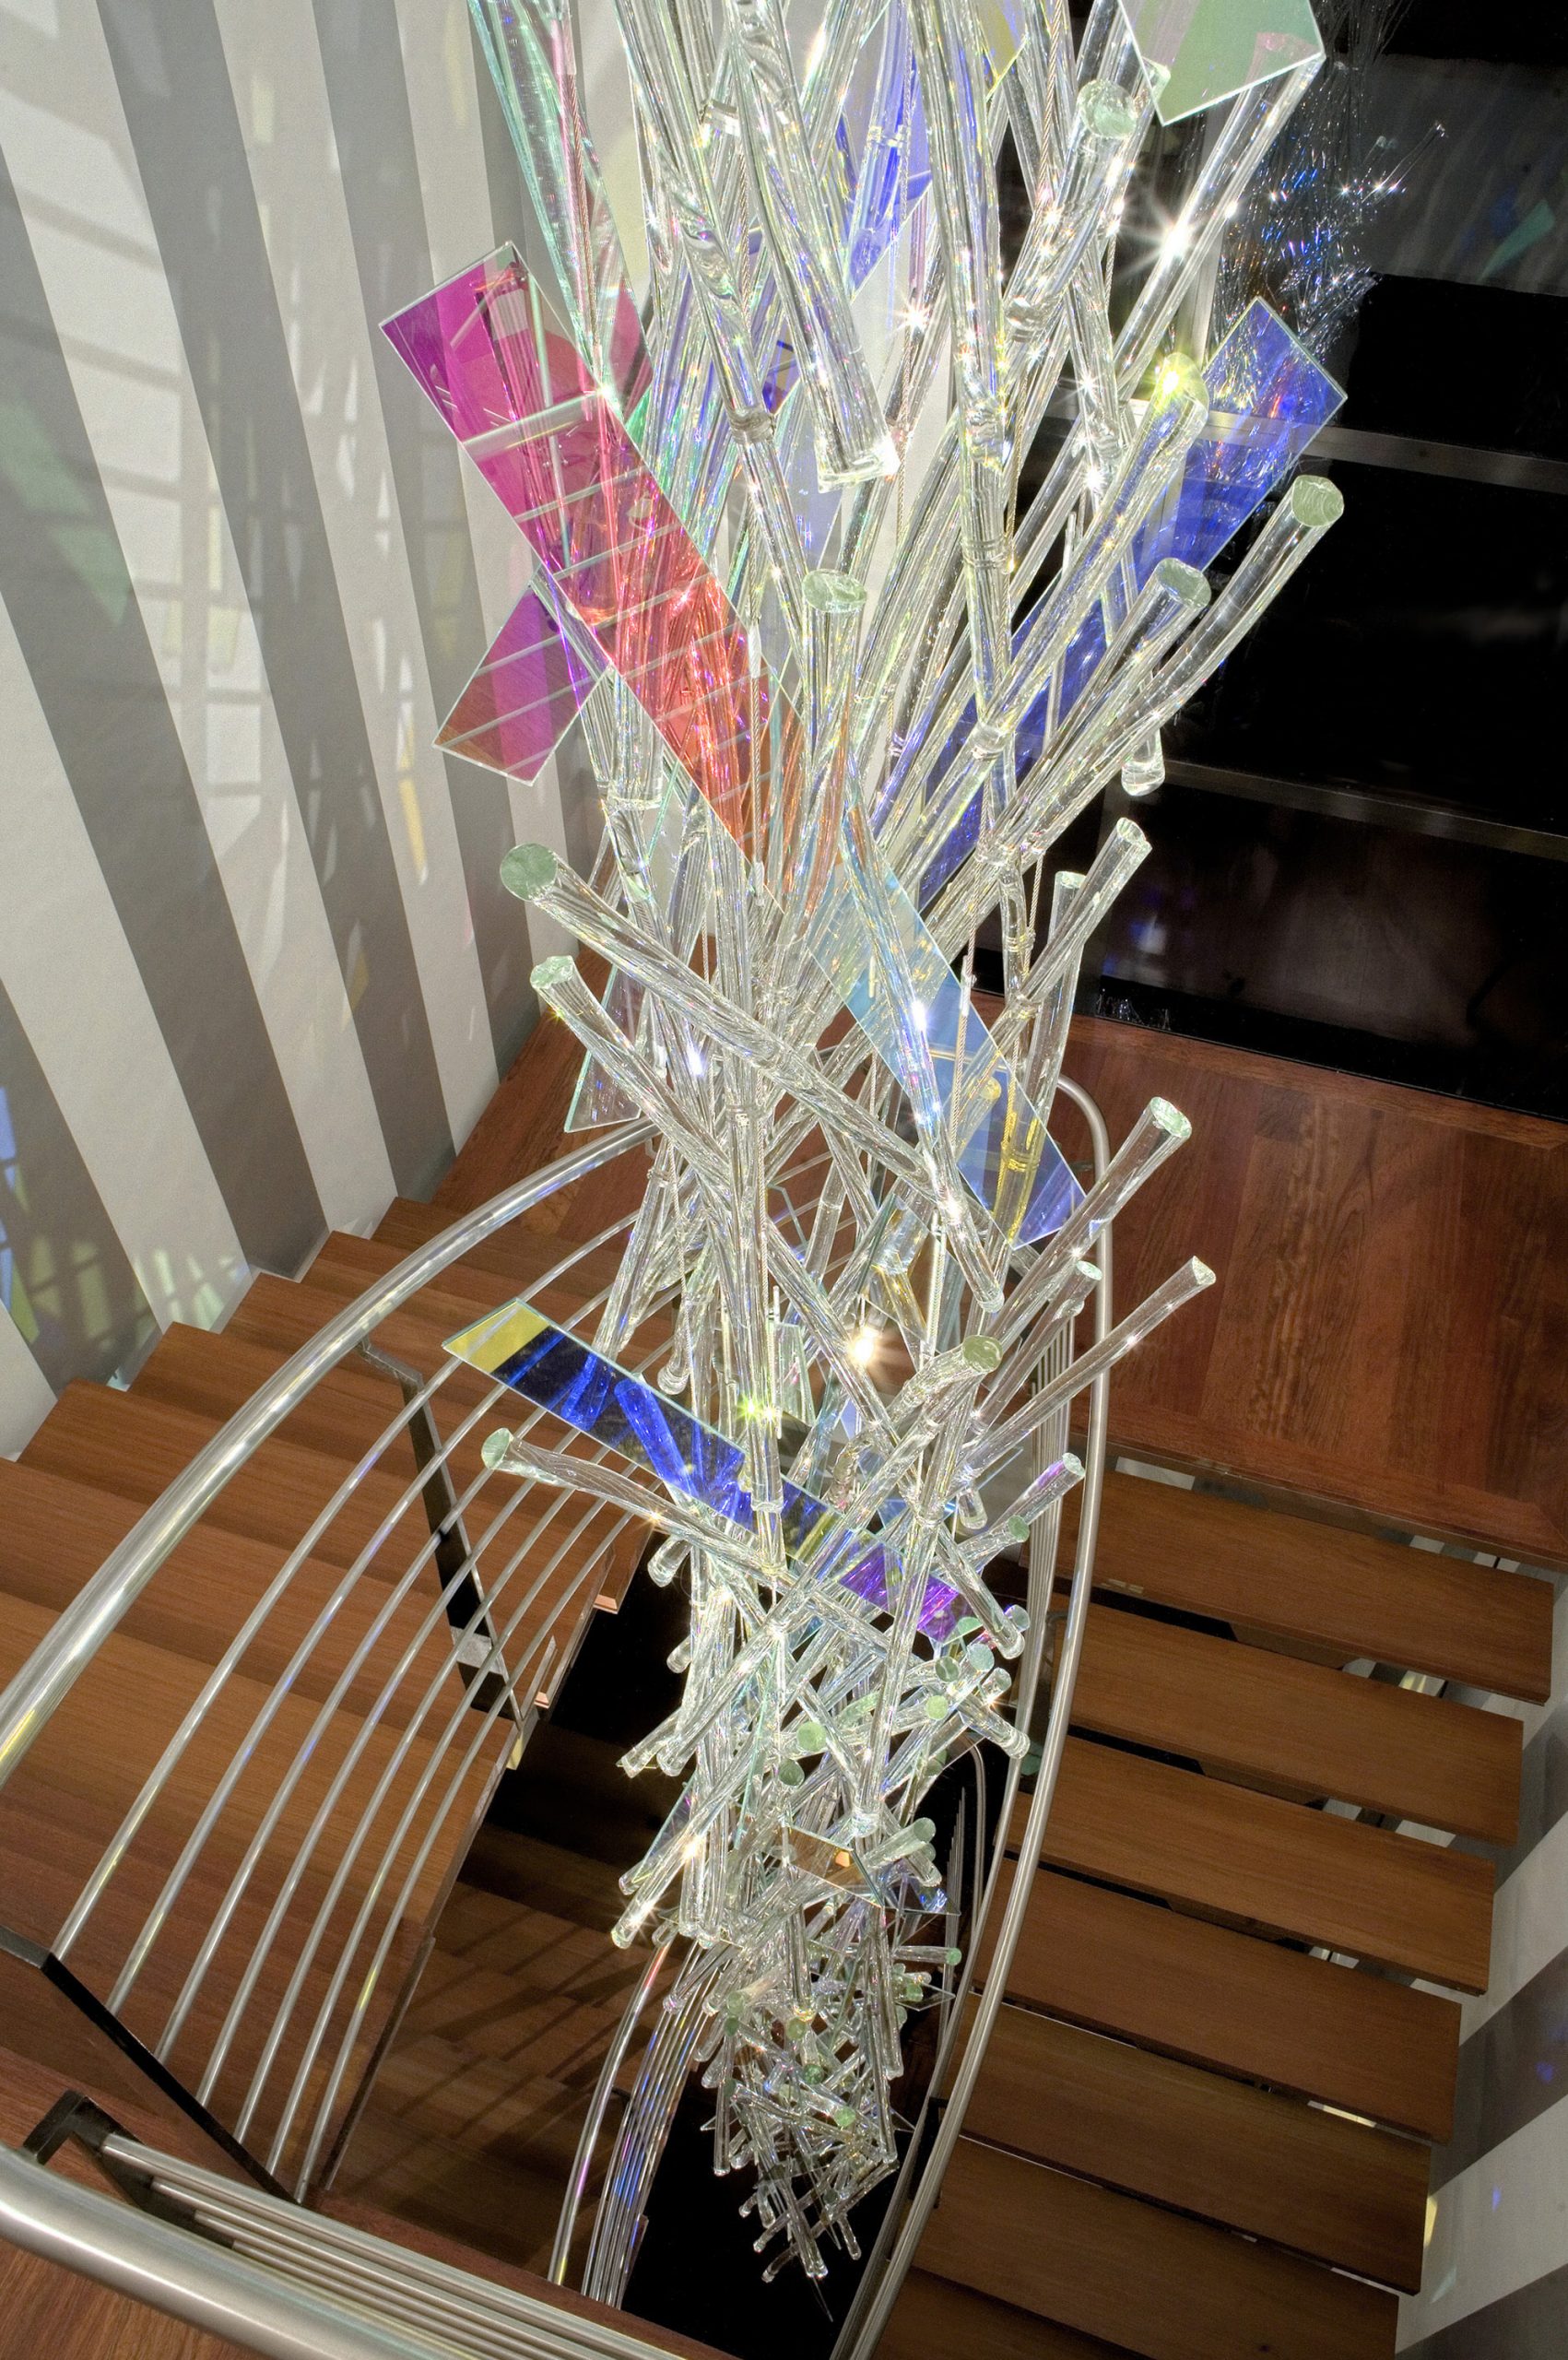 Sticks and Stones – Suspended Stairwell Sculpture